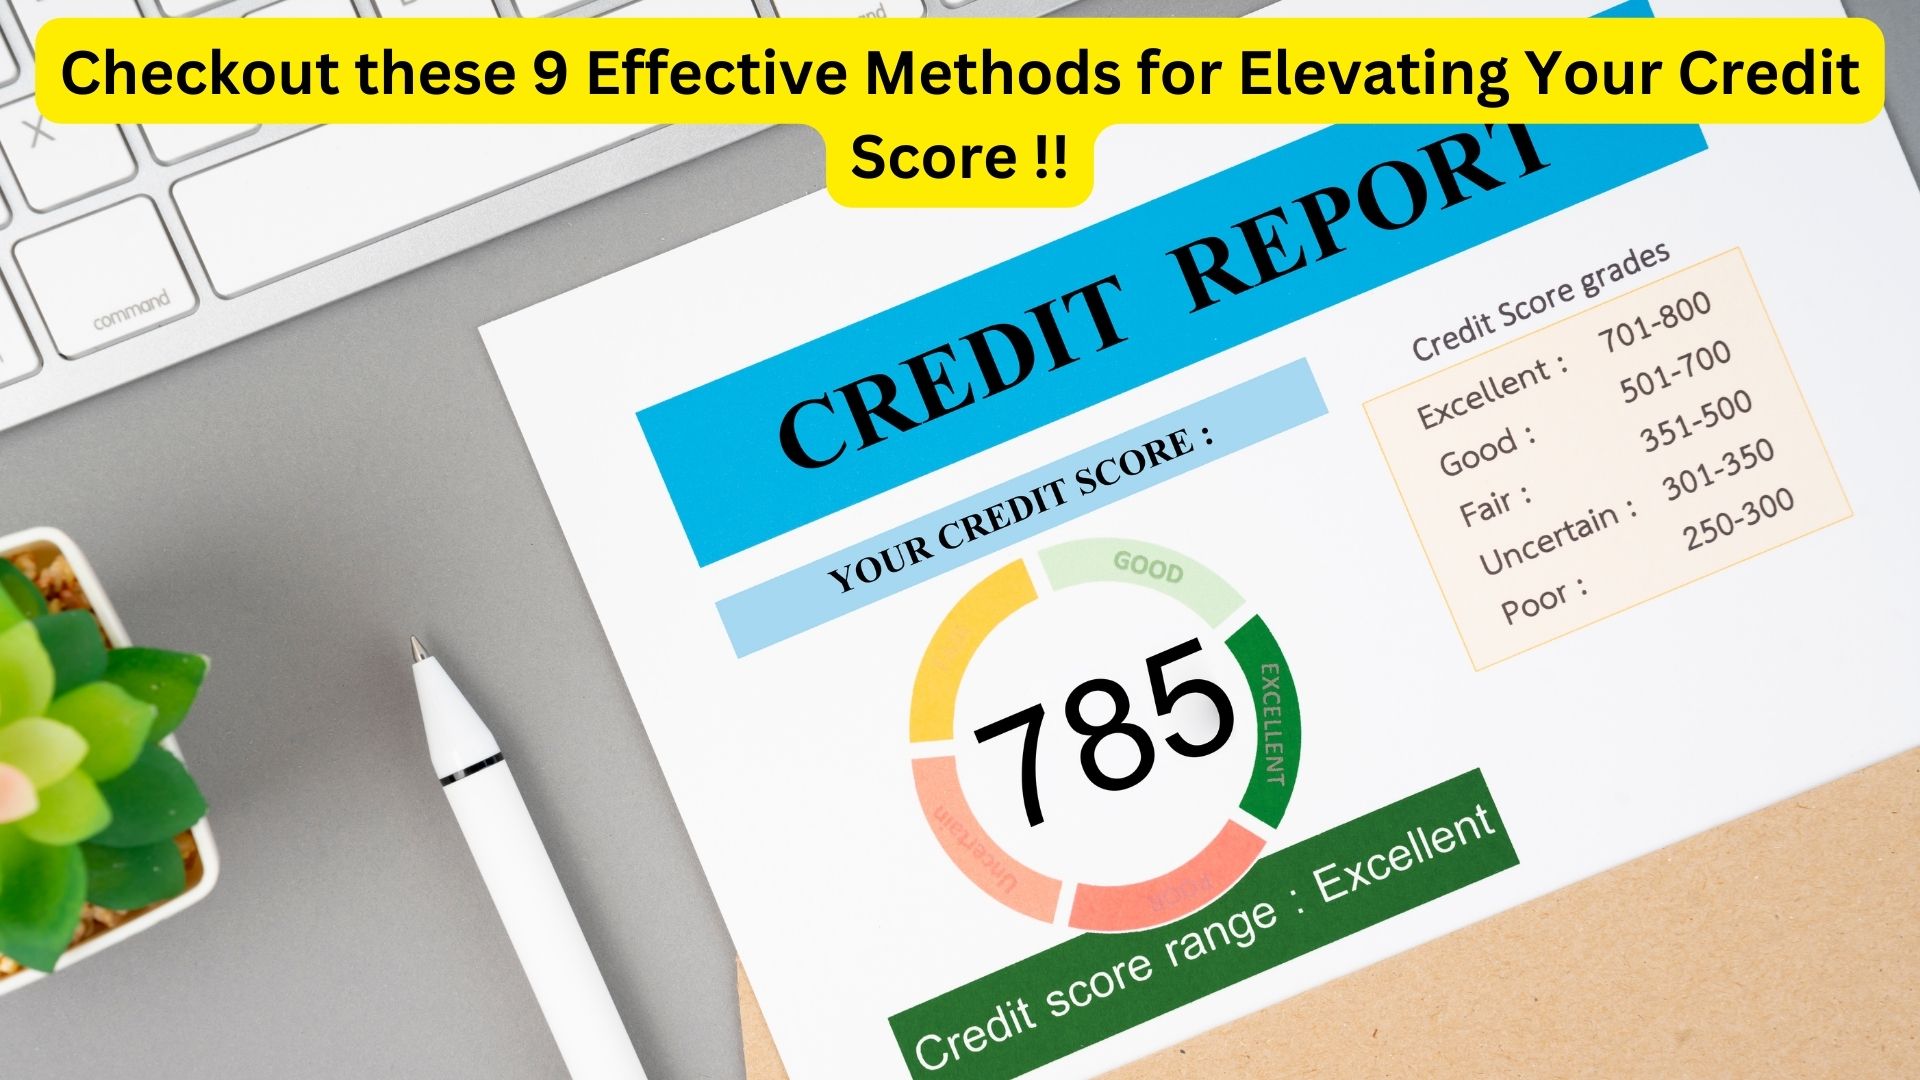 Checkout these 9 Effective Methods for Elevating Your Credit Score !!